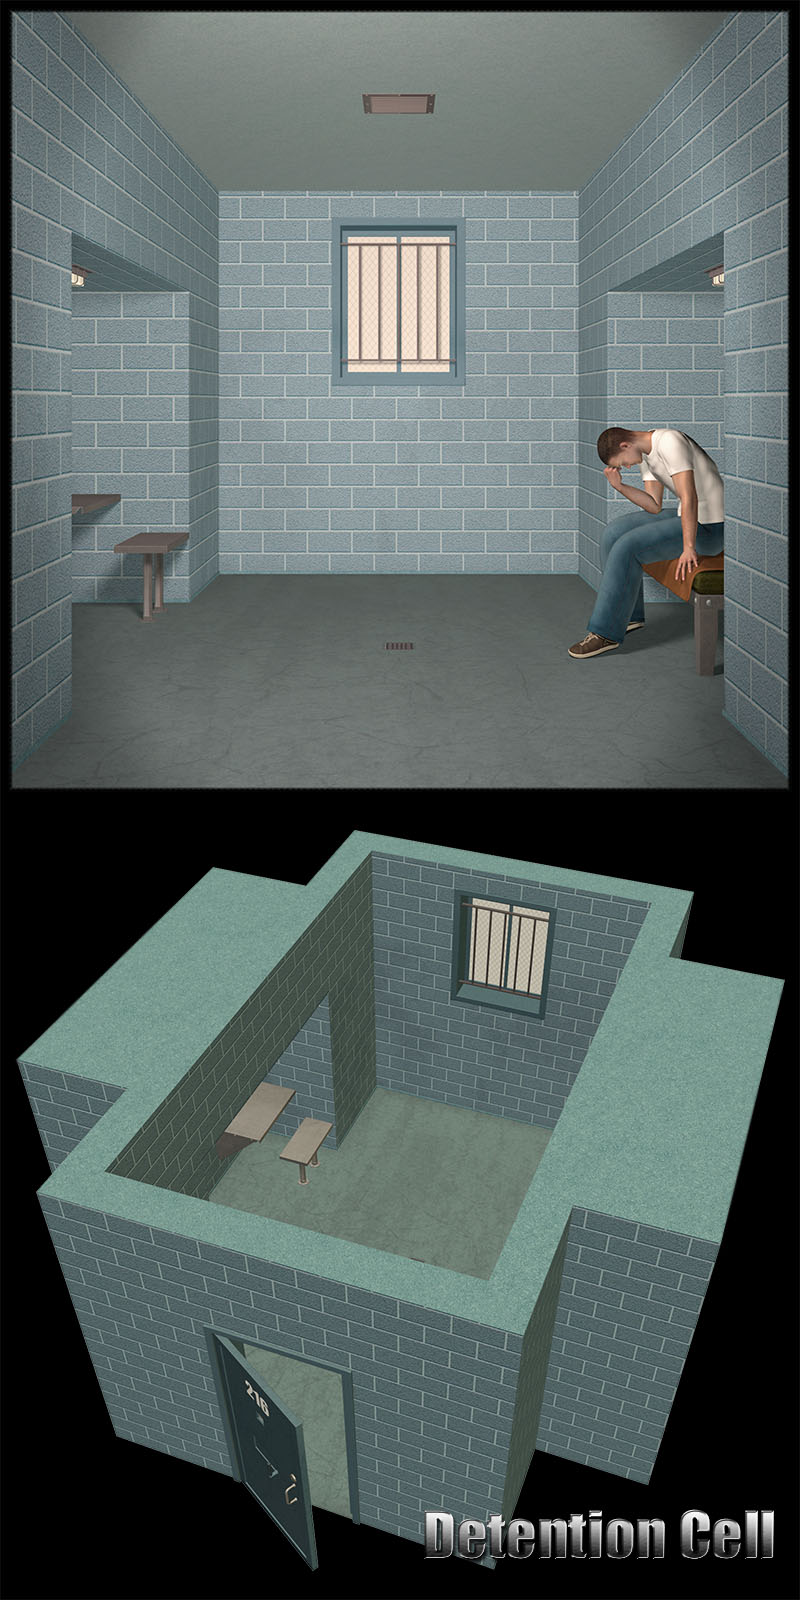 Detention Cell